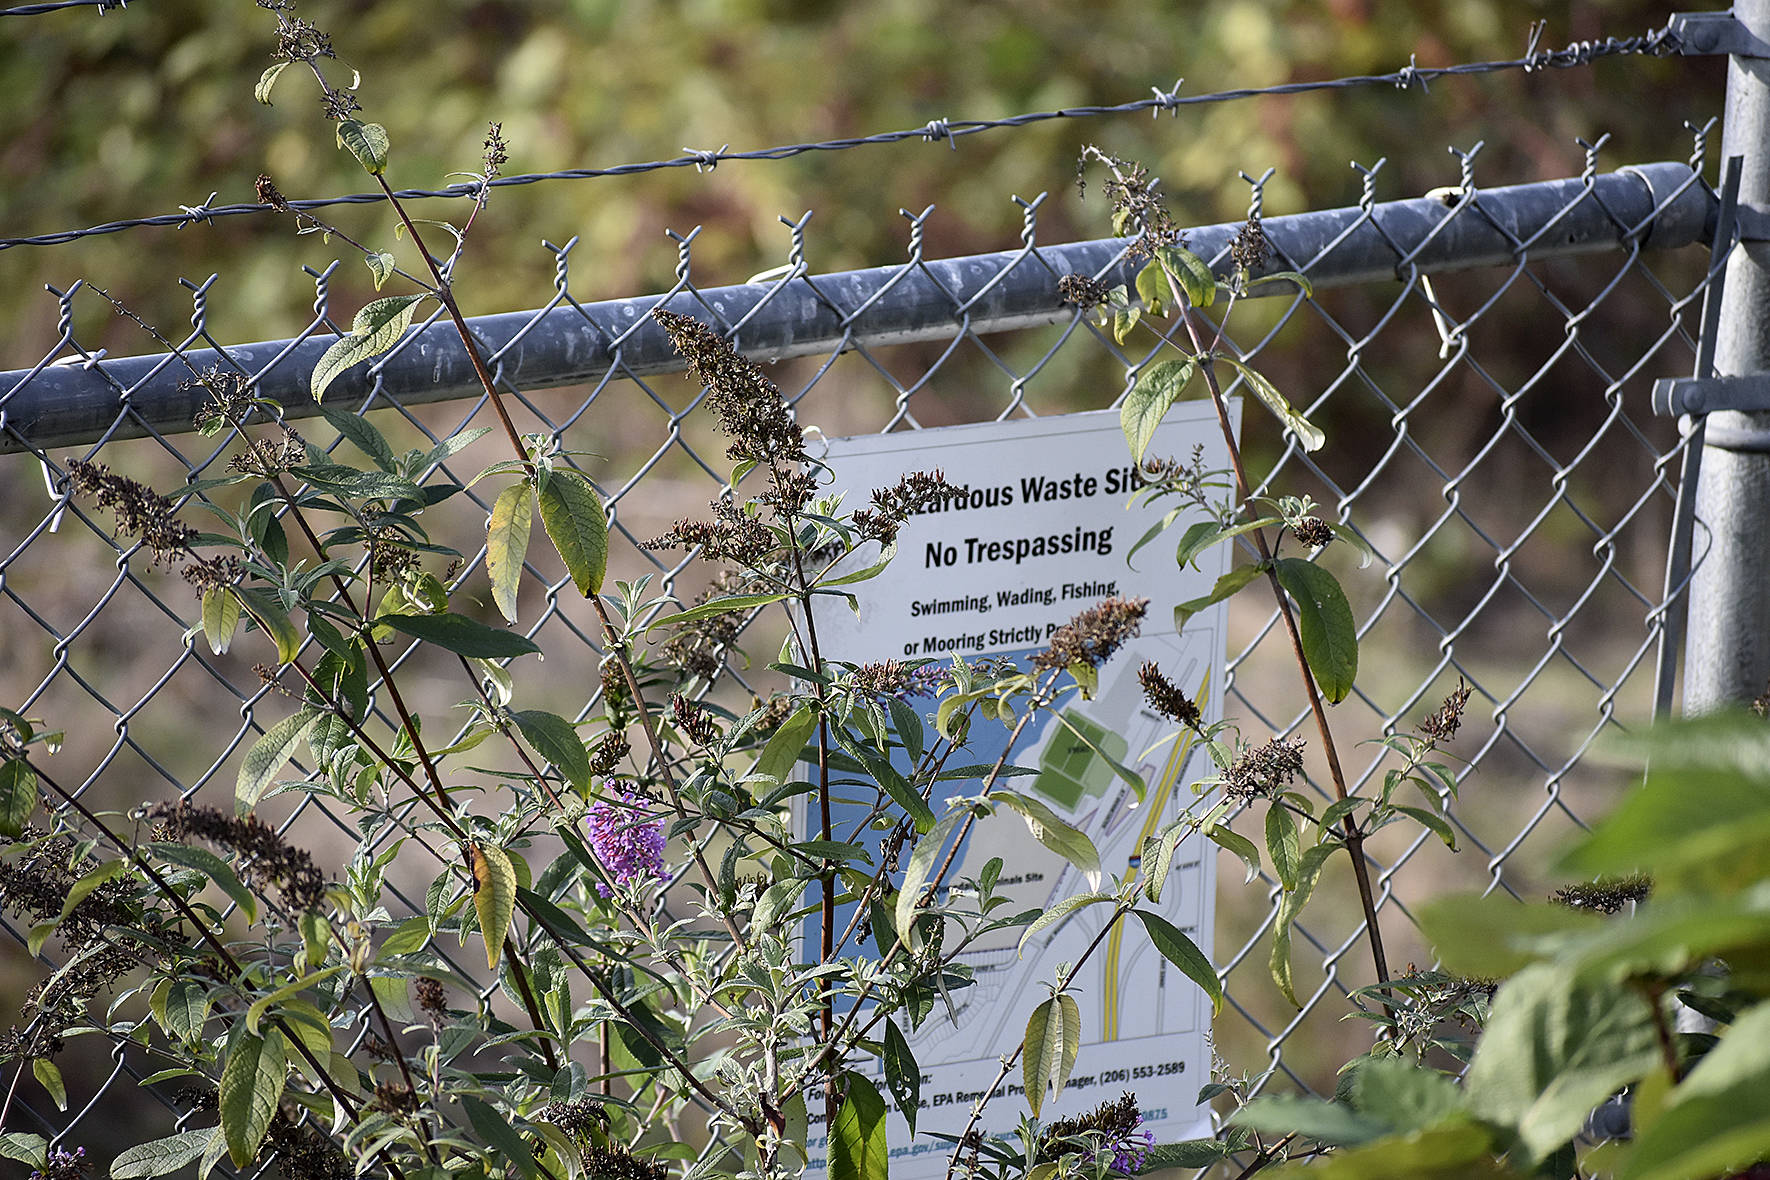 Photo by Haley Ausbun. The Quendall Terminals site is fenced off and signage warns folks from approaching. But property owners and EPA want to clean it up and making it livable, shop-able, enjoyable Lake Washington waterfront property.